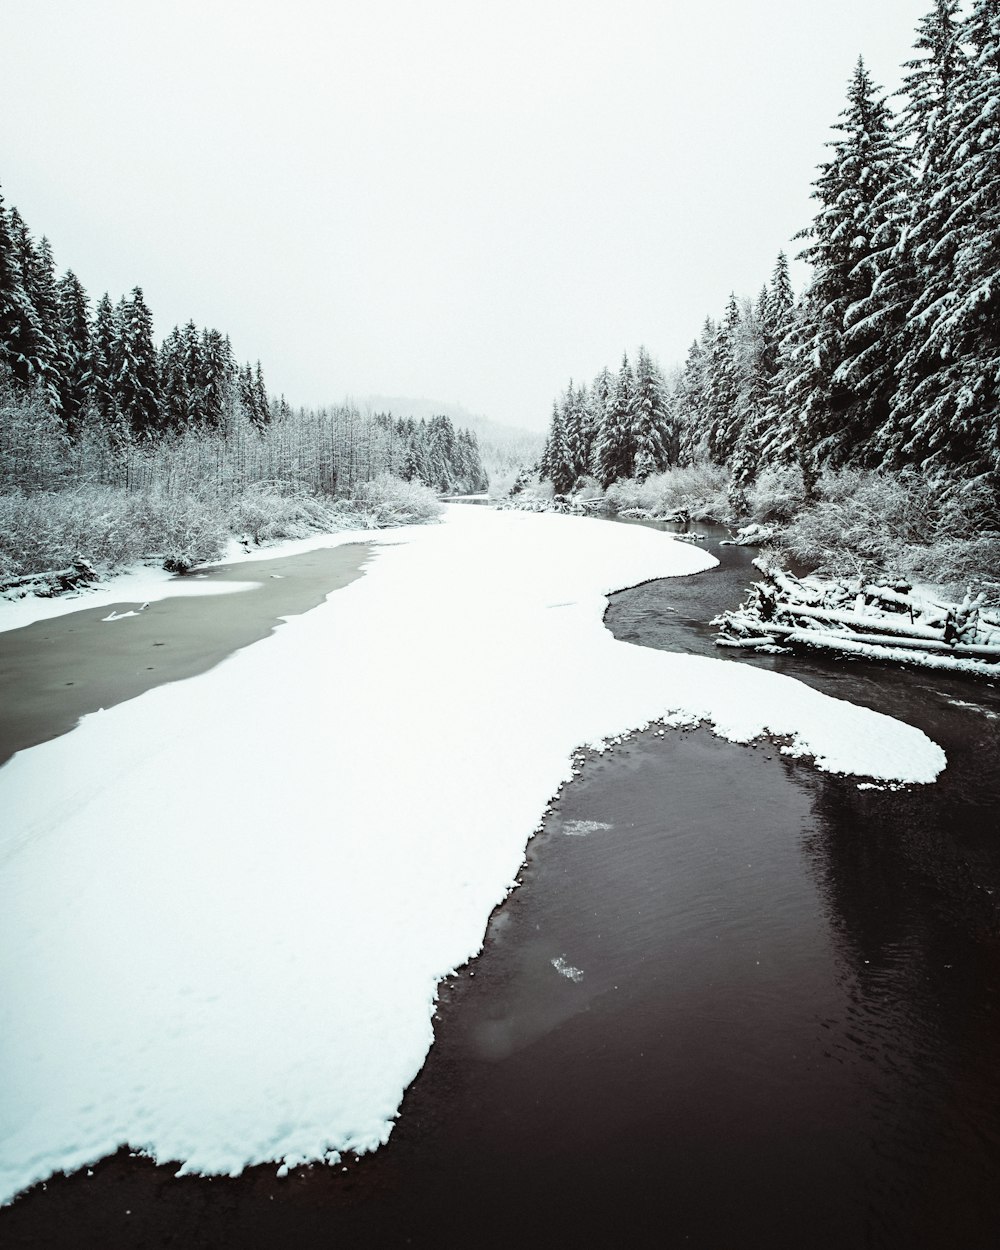 snow covered trees and river during daytime